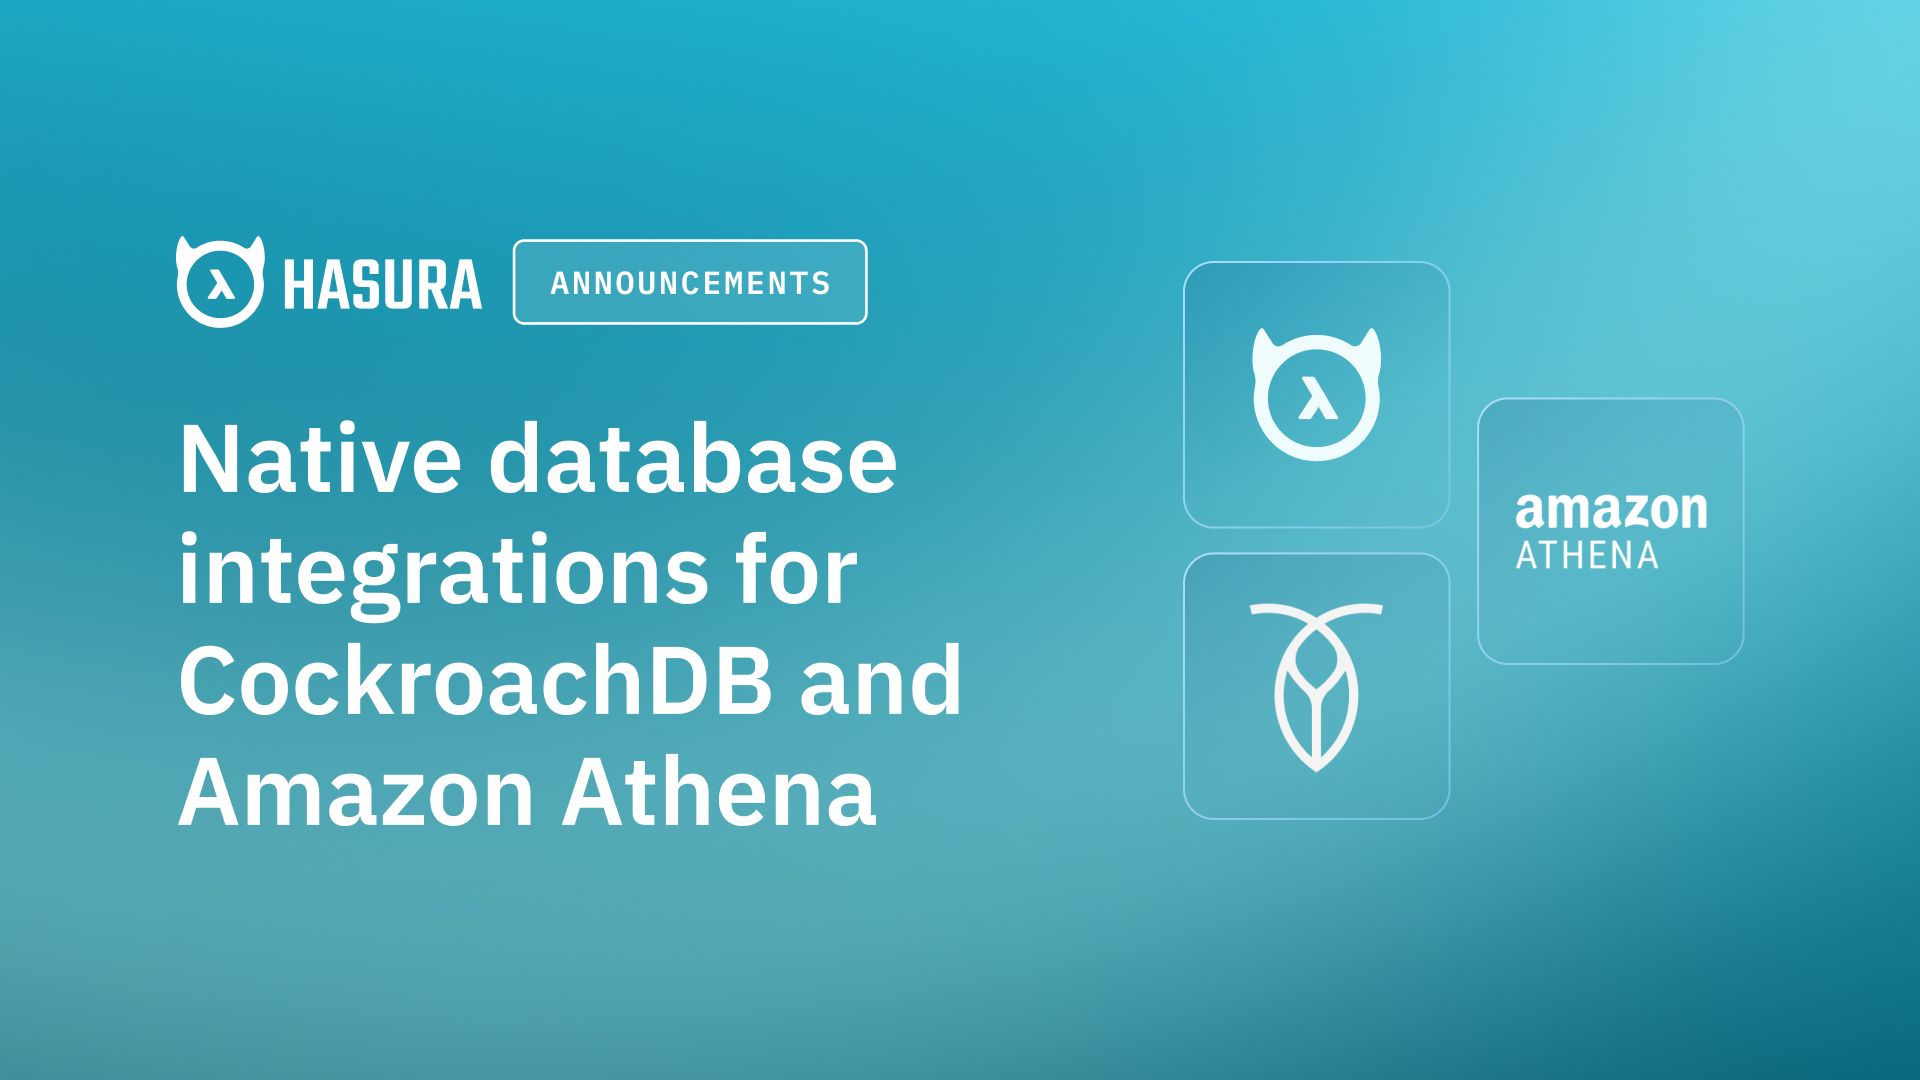 Announcing native database integrations for CockroachDB and Amazon Athena